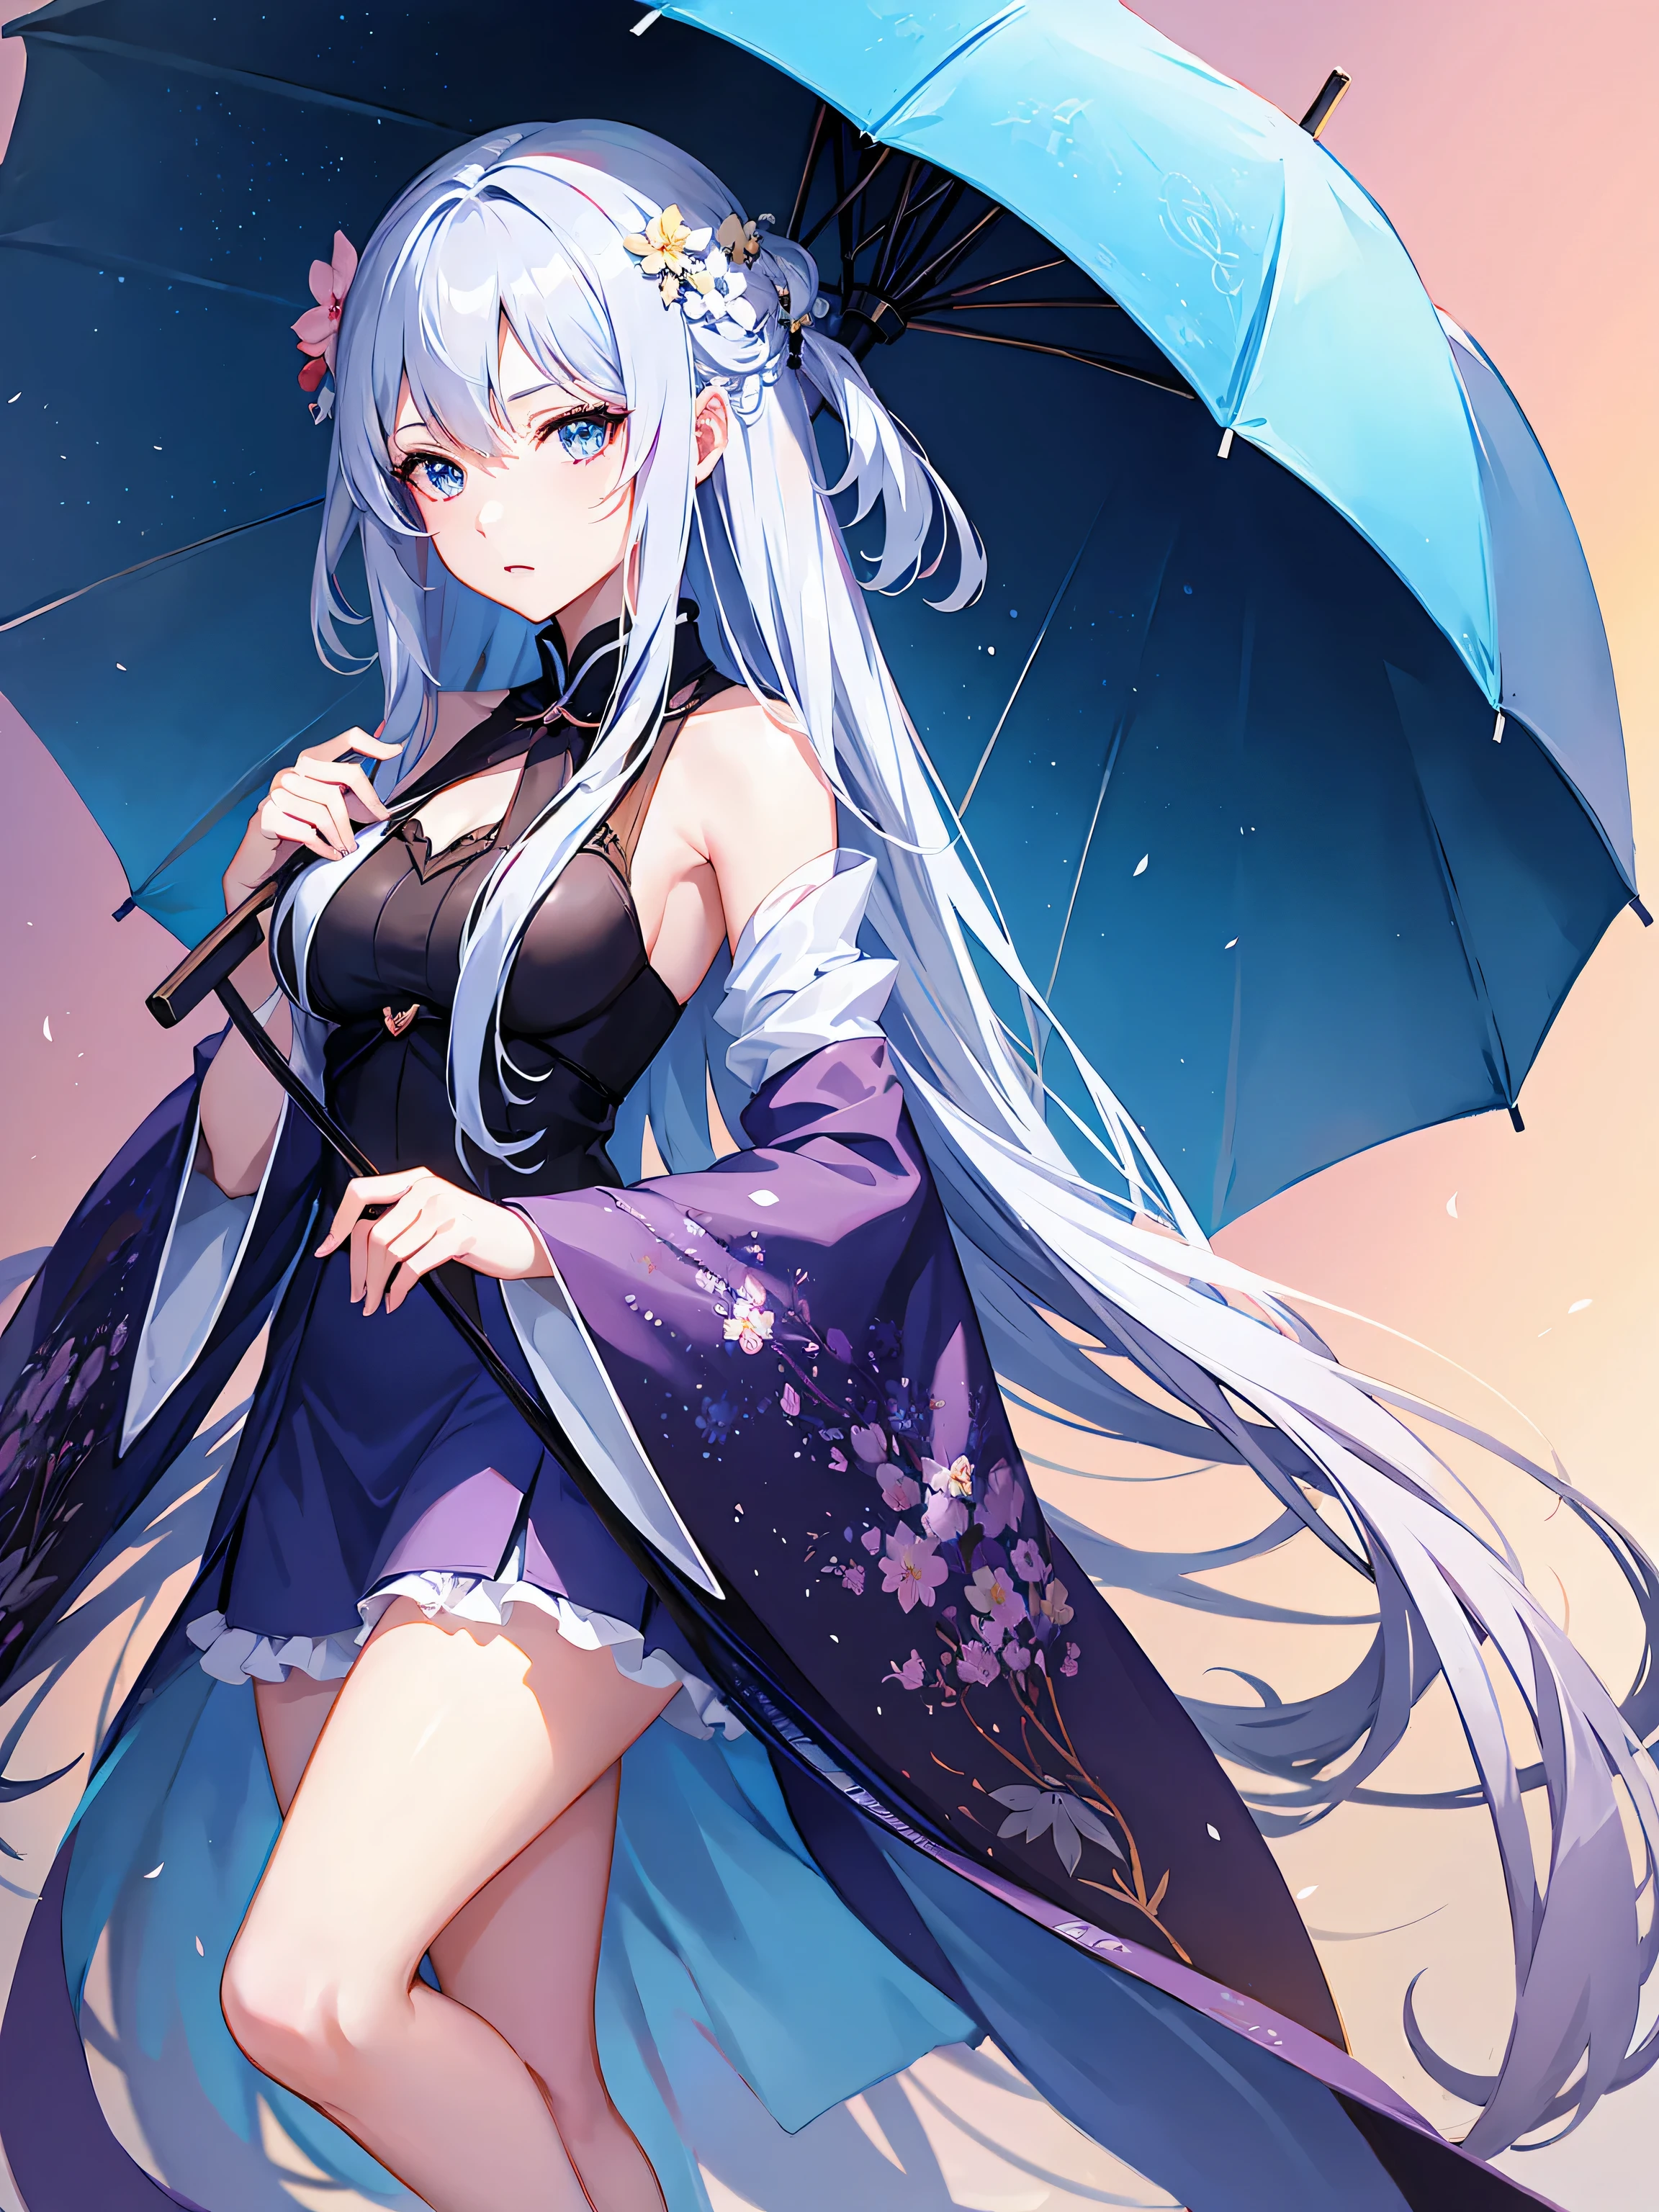 anime girl with umbrella and flowers in her hair, guweiz, detailed anime artwork, clean detailed anime art, detailed digital anime art, detailed anime art, beautiful anime portrait, beautiful anime girl, beautiful anime artwork, artwork in the style of guweiz, beautiful anime art, beautiful anime style, detailed portrait of anime girl, anime girl, beautiful anime, anime illustration